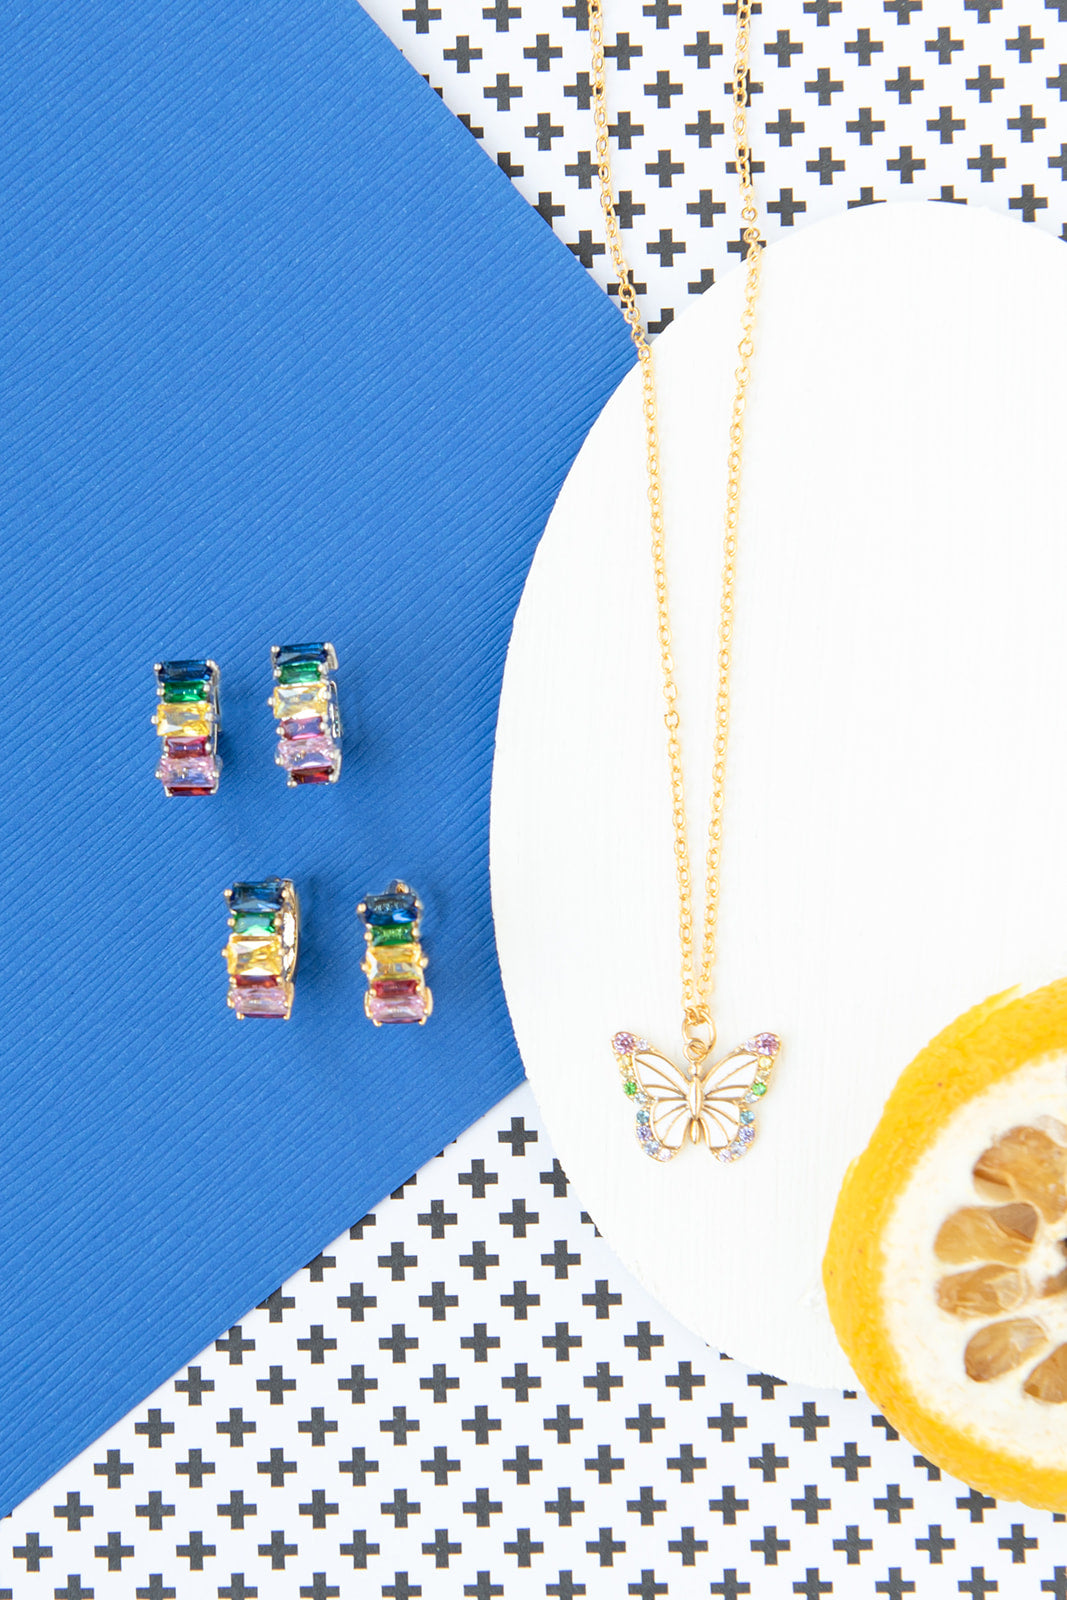 Butterfly Insect Rainbow CZ Enamel Charm Necklace